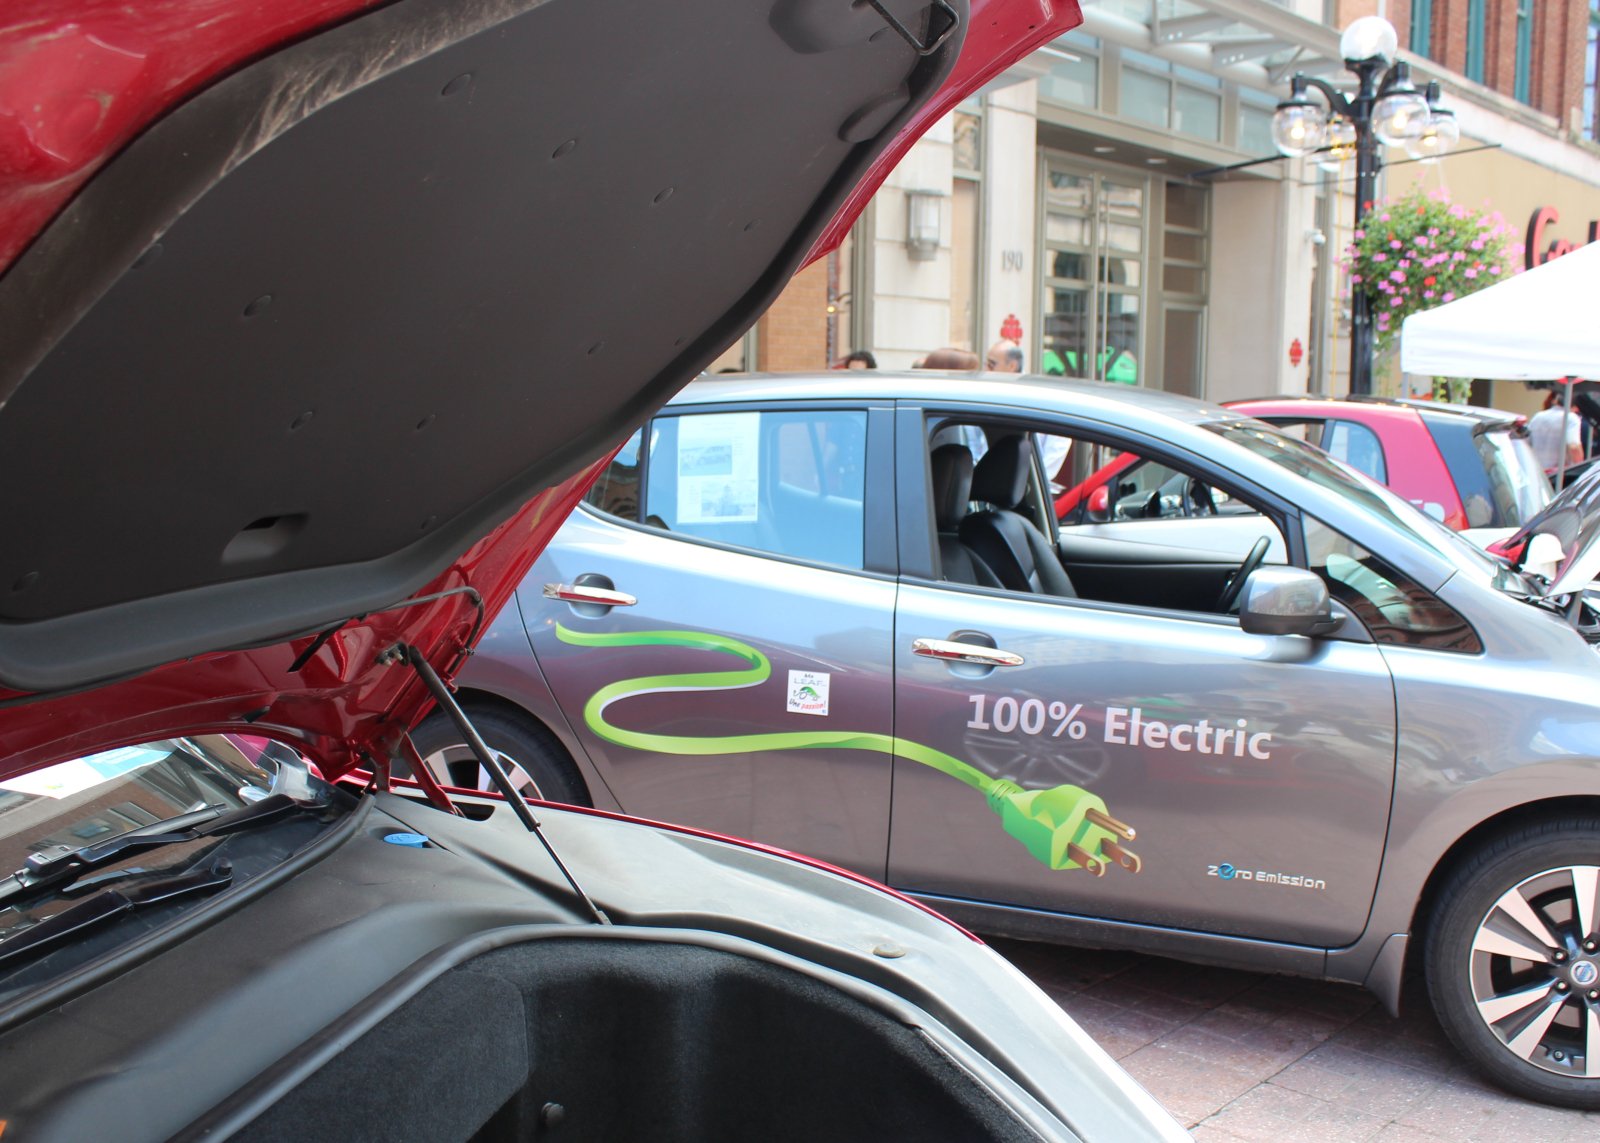 The 100% electric Nissan leaf